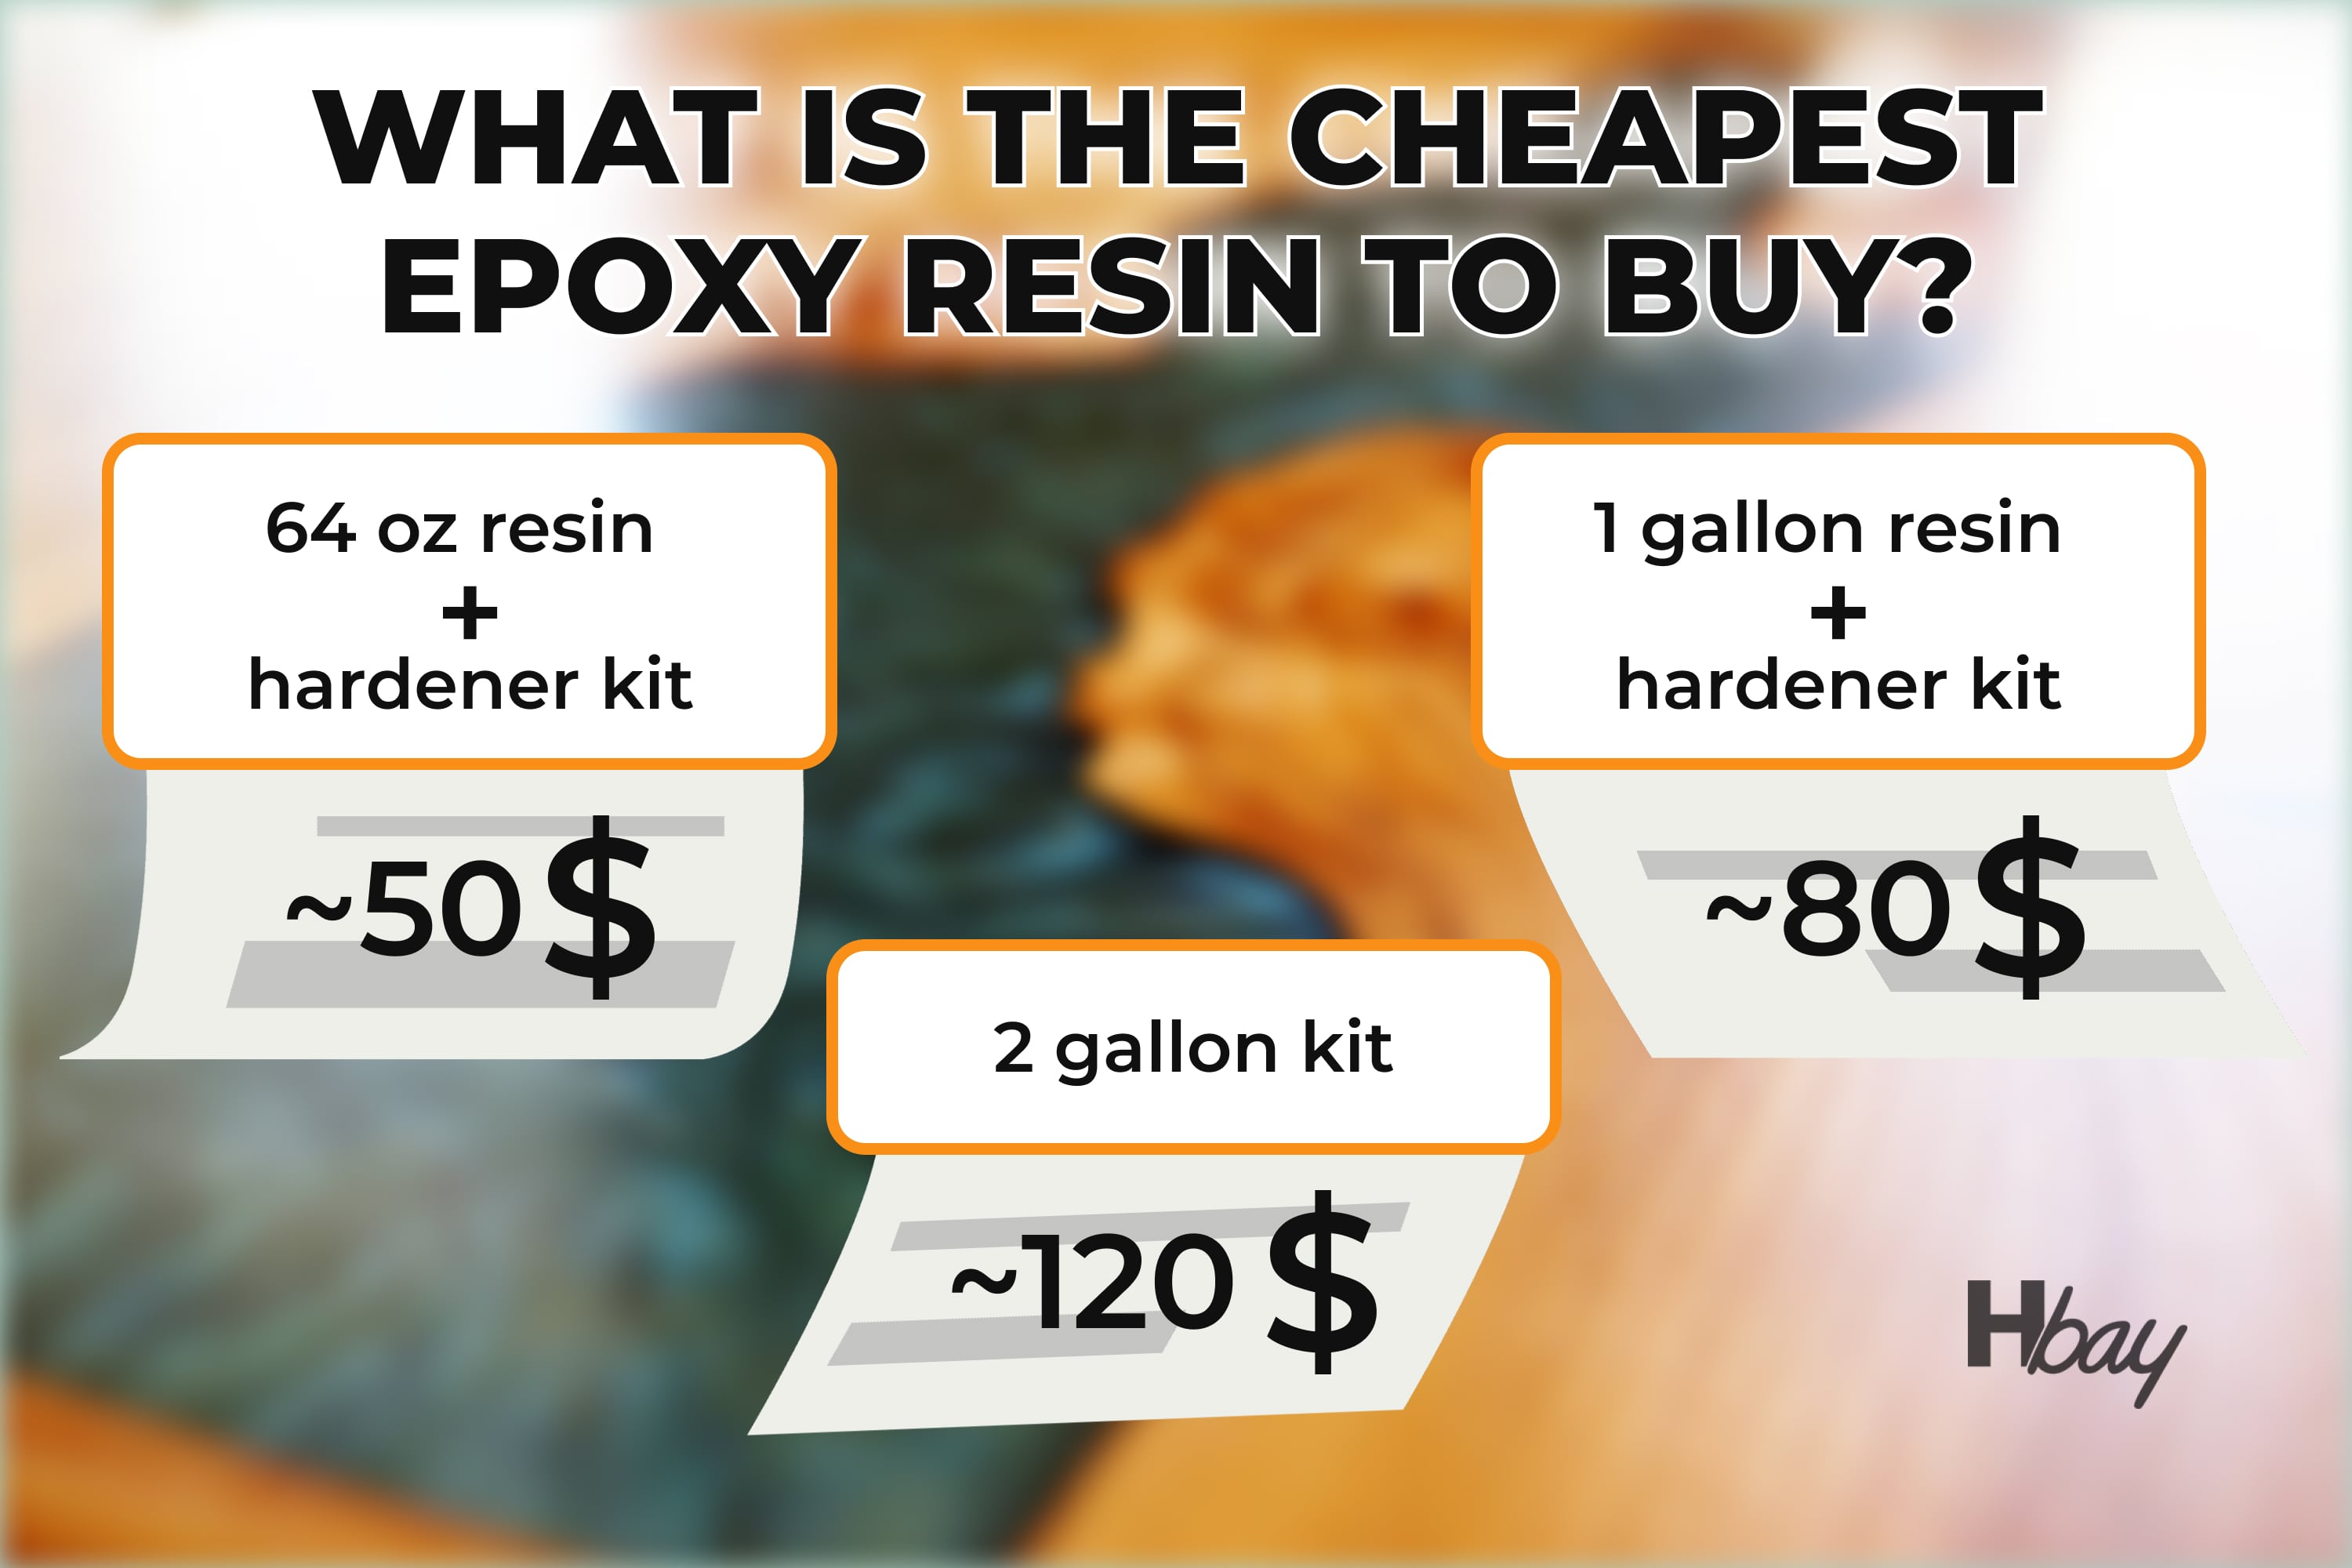 What Is the Cheapest Epoxy Resin to Buy